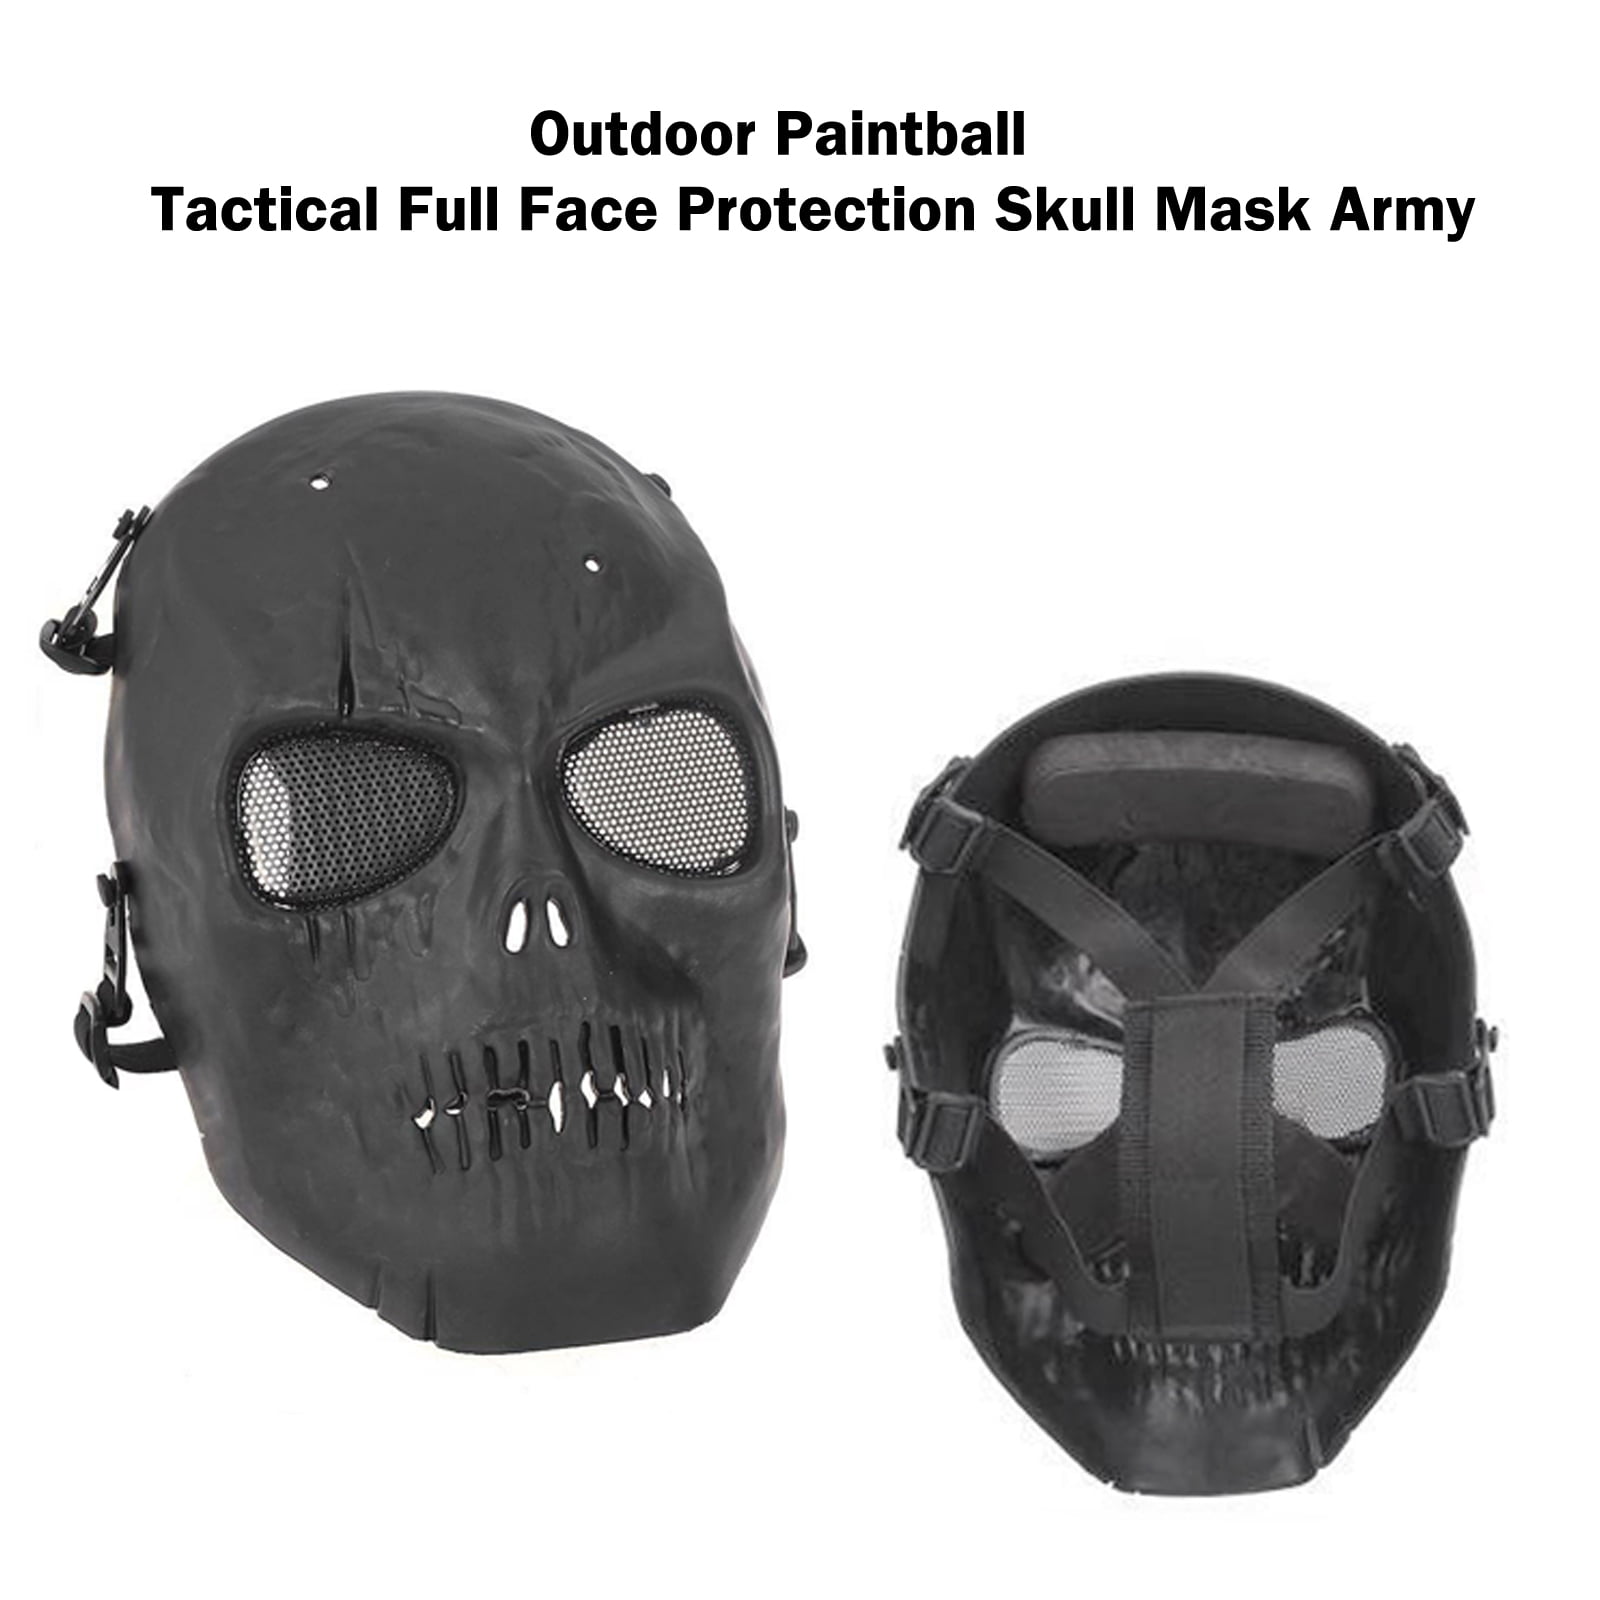 Details about   Outdoor Paintball Tactical Full Face Protection Skull Mask Army SA 